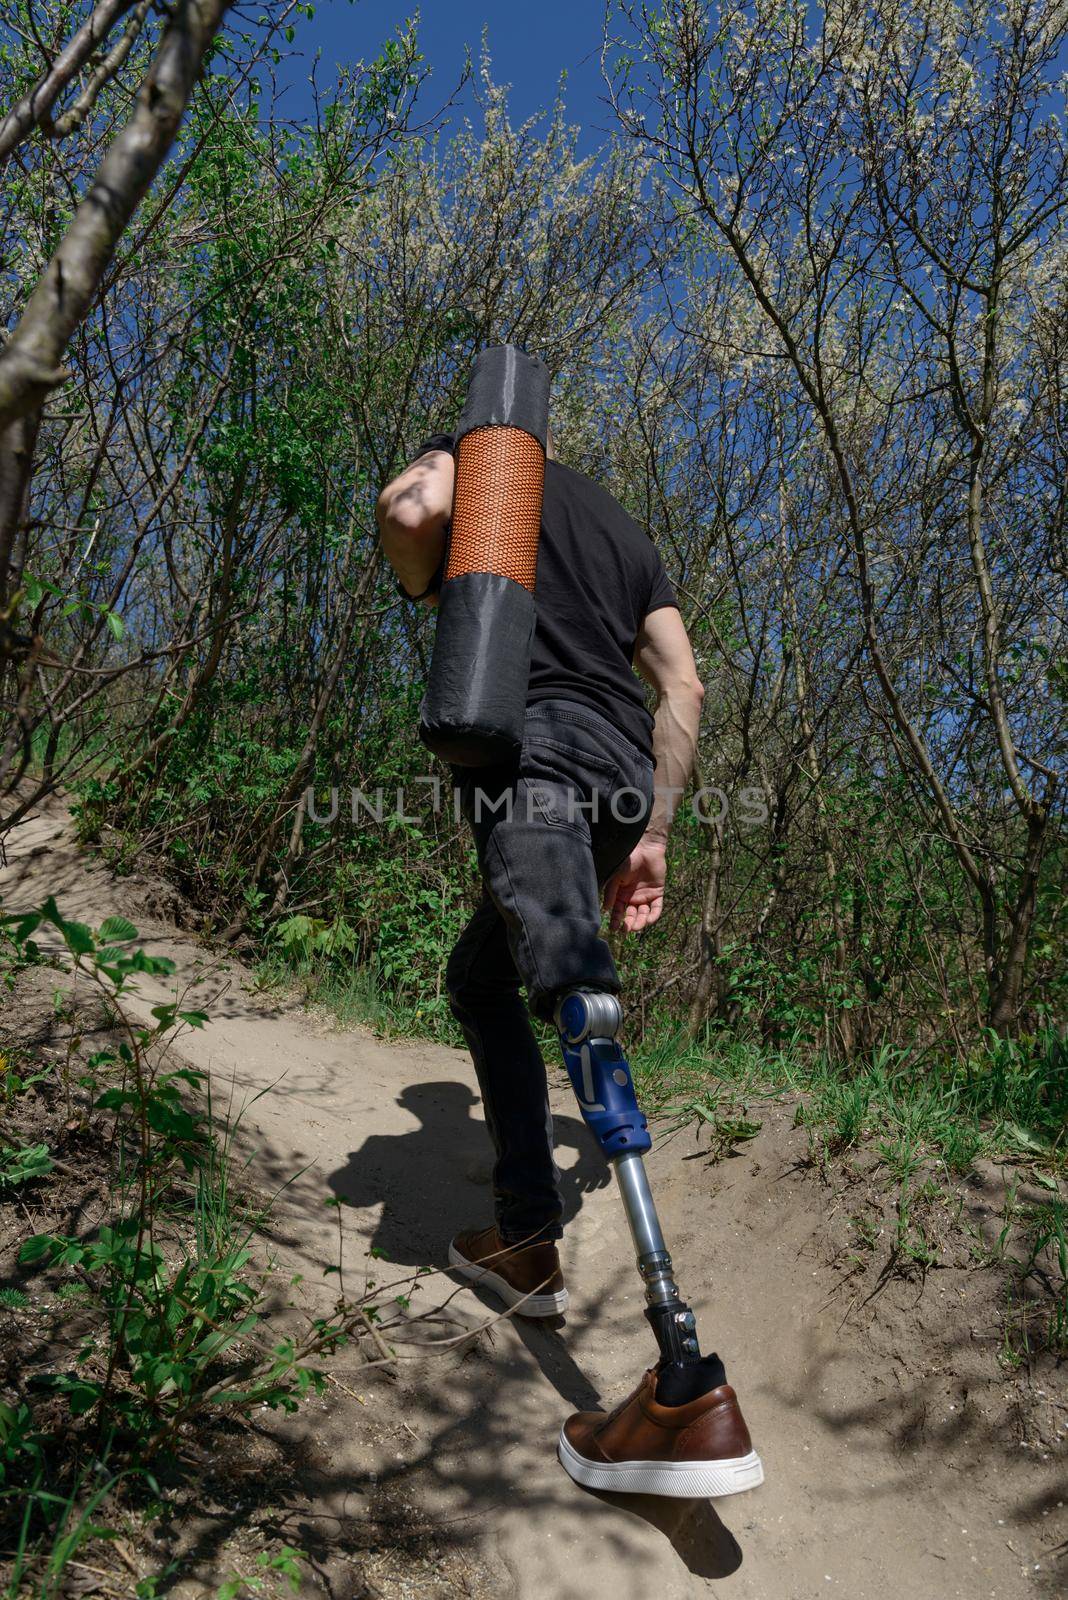 a man on a prosthetic leg travels the mountains. Dressed in black jeans and a T-shirt, he carrying mat by Ashtray25